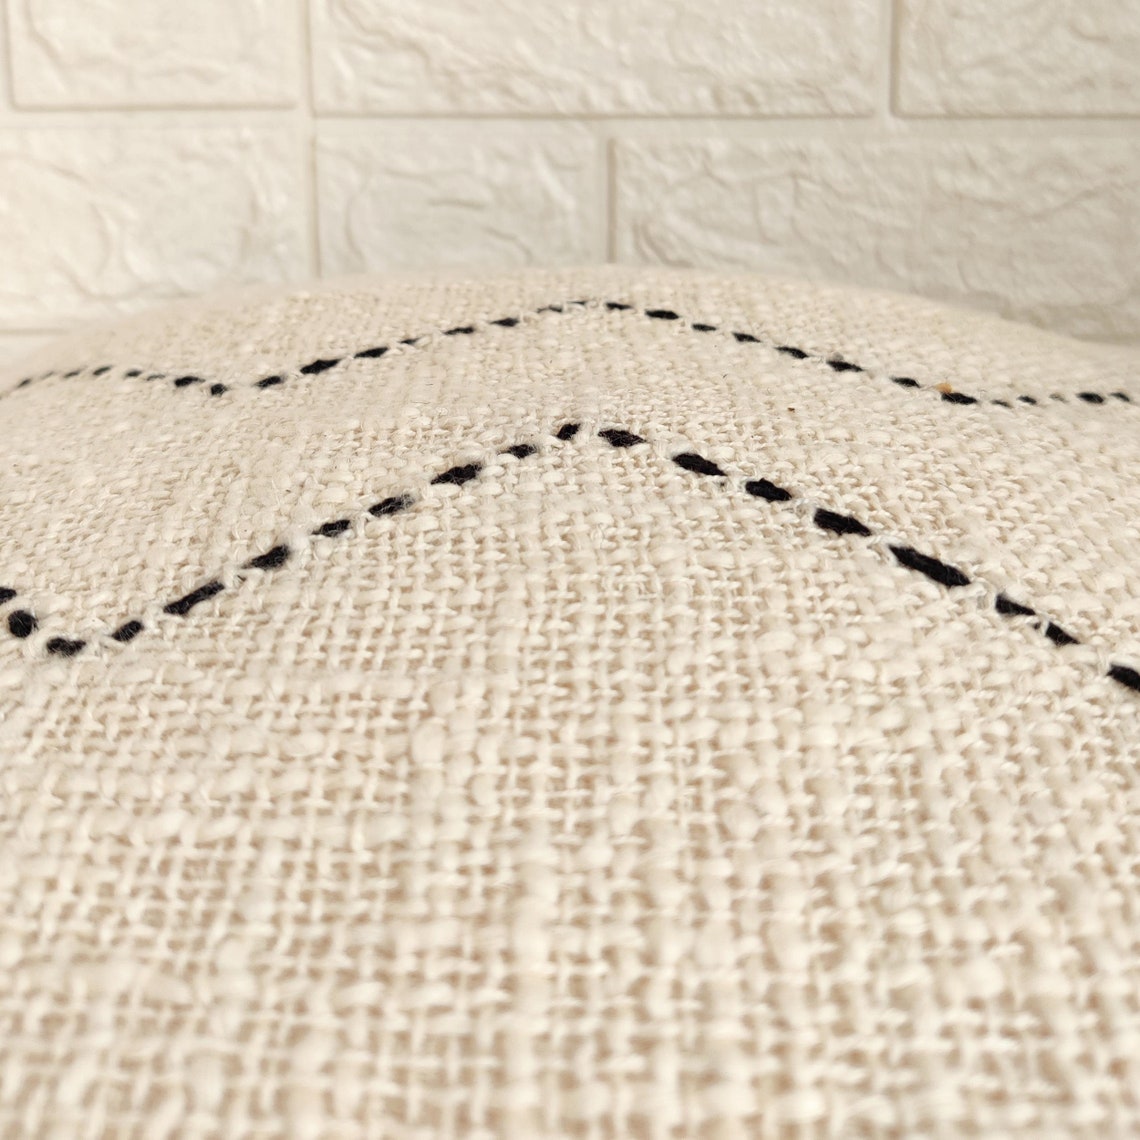 Ivory and Black Kantha Textured Cotton Cushion Cover